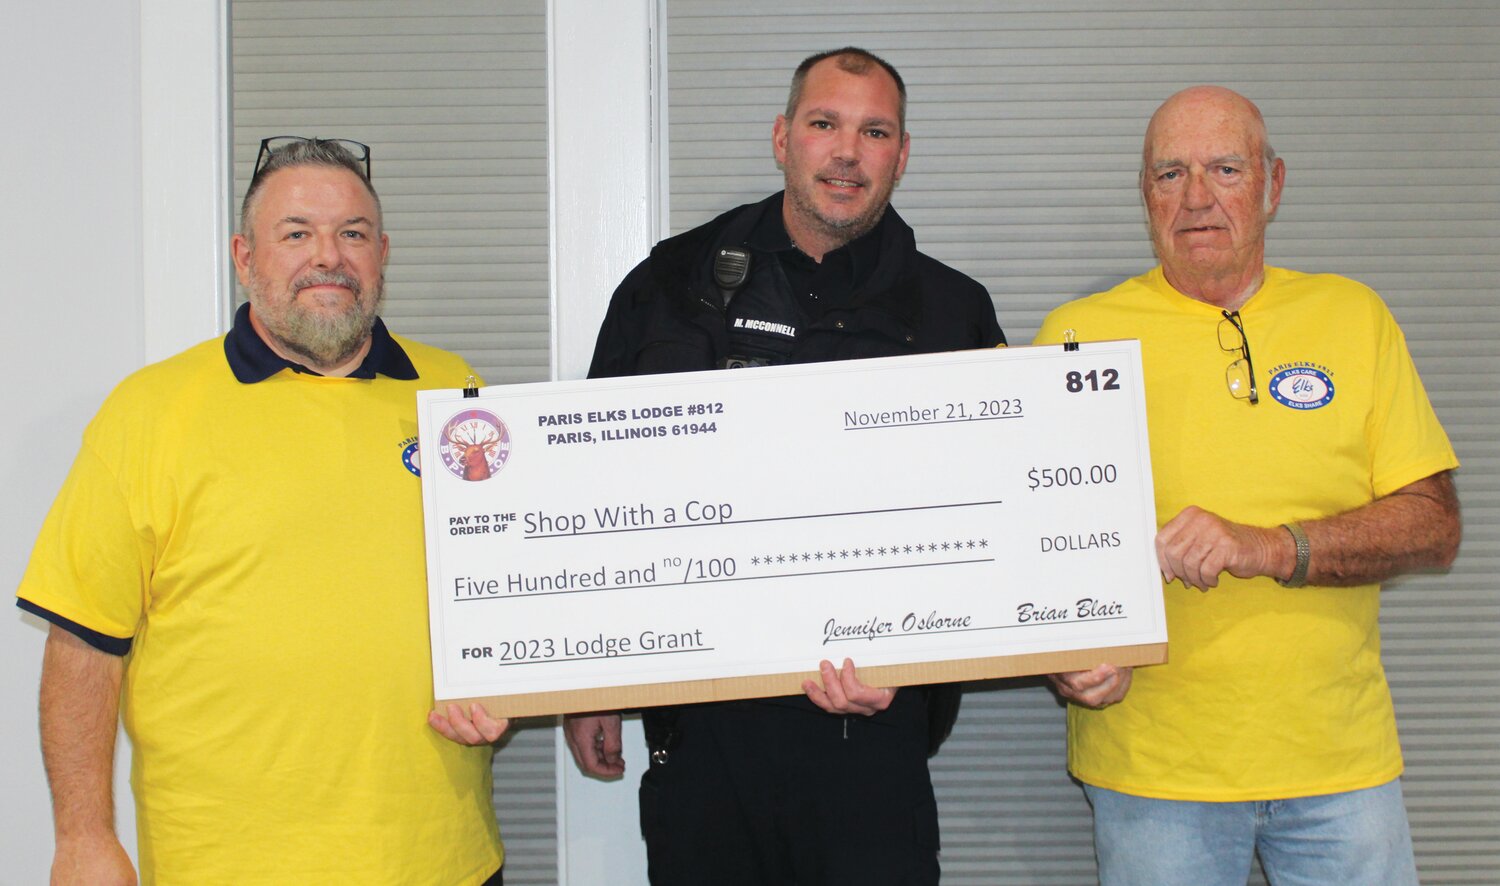 Shop with a Cop received a $500 donation from the Paris Elks. Left to right are Brian Blair, Matthew McConnell and Don Humphrey.